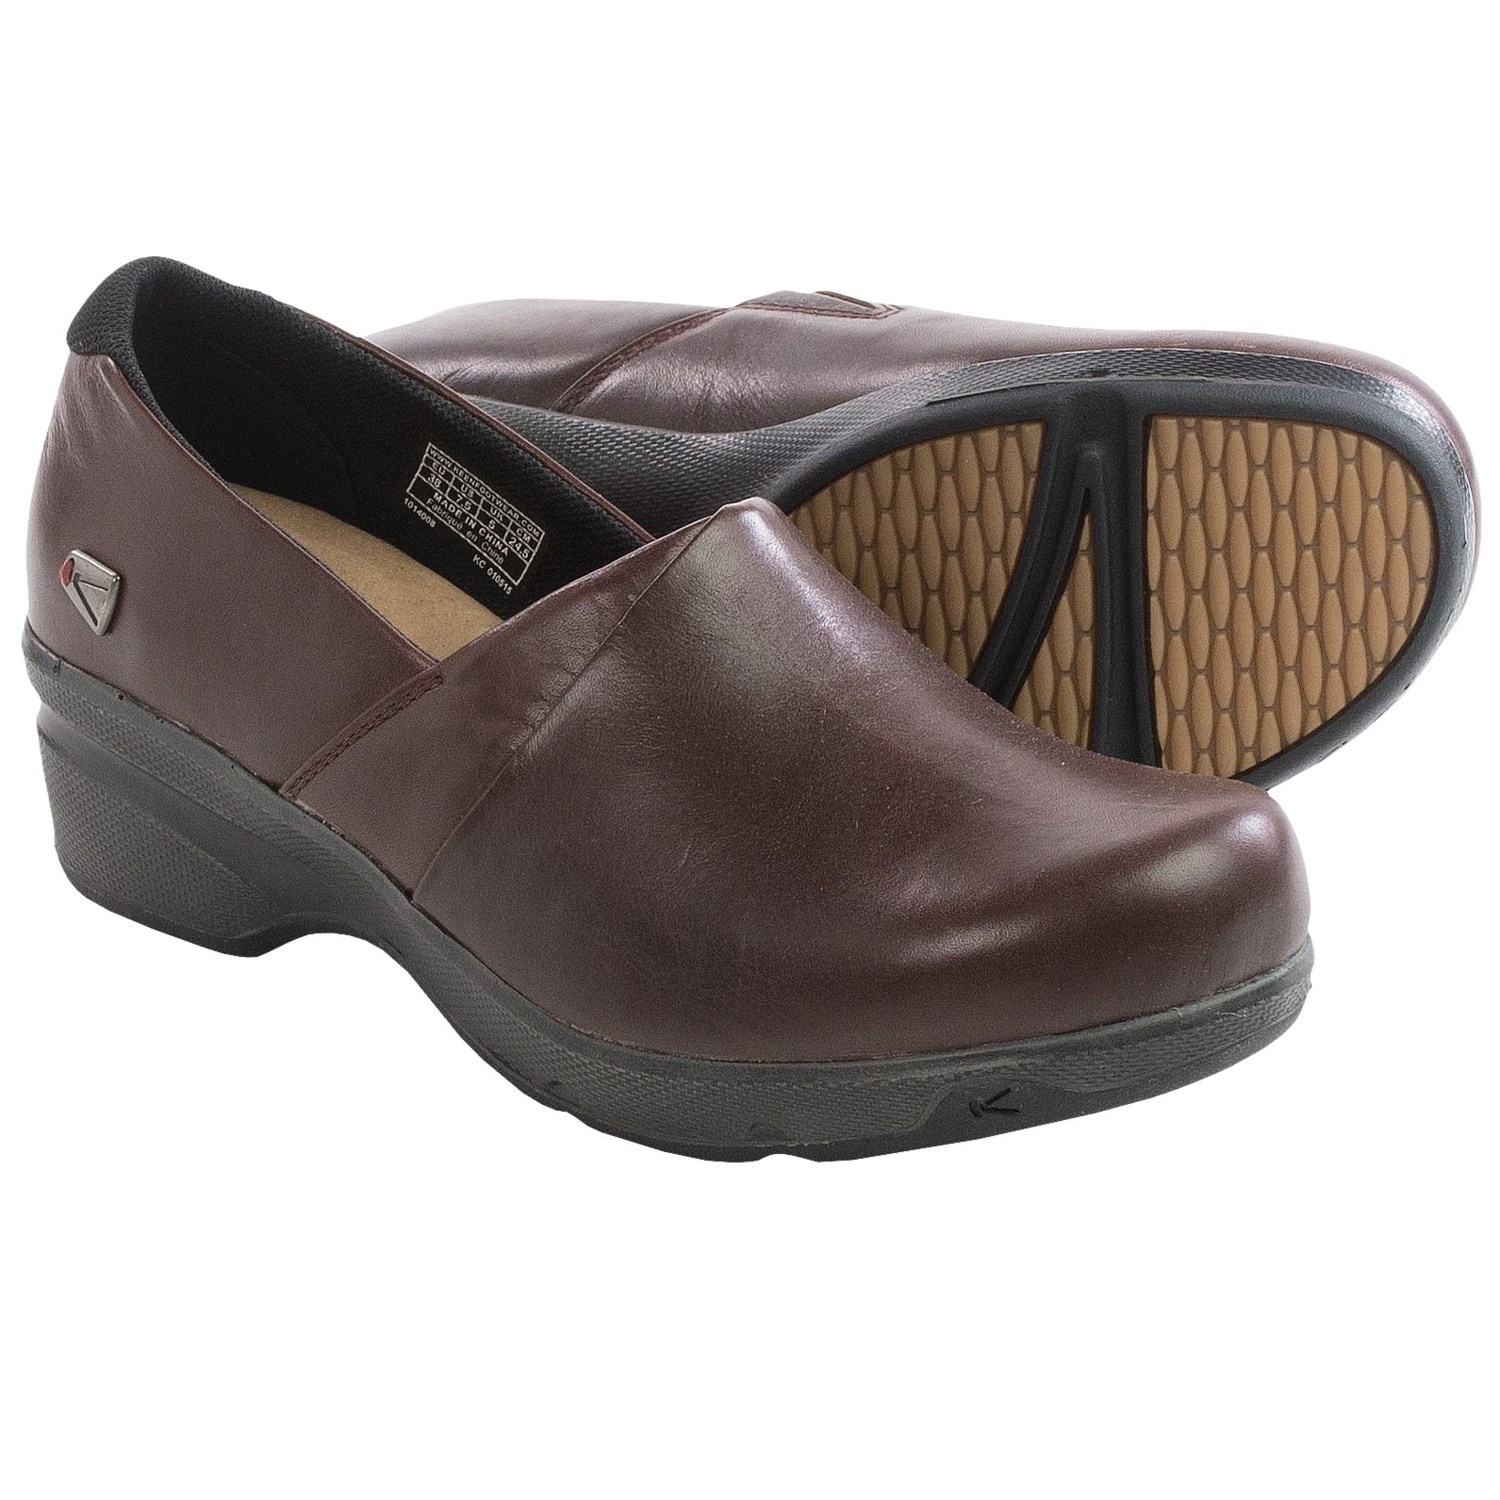 Keen Mora Clogs (For Women) - Save 38%